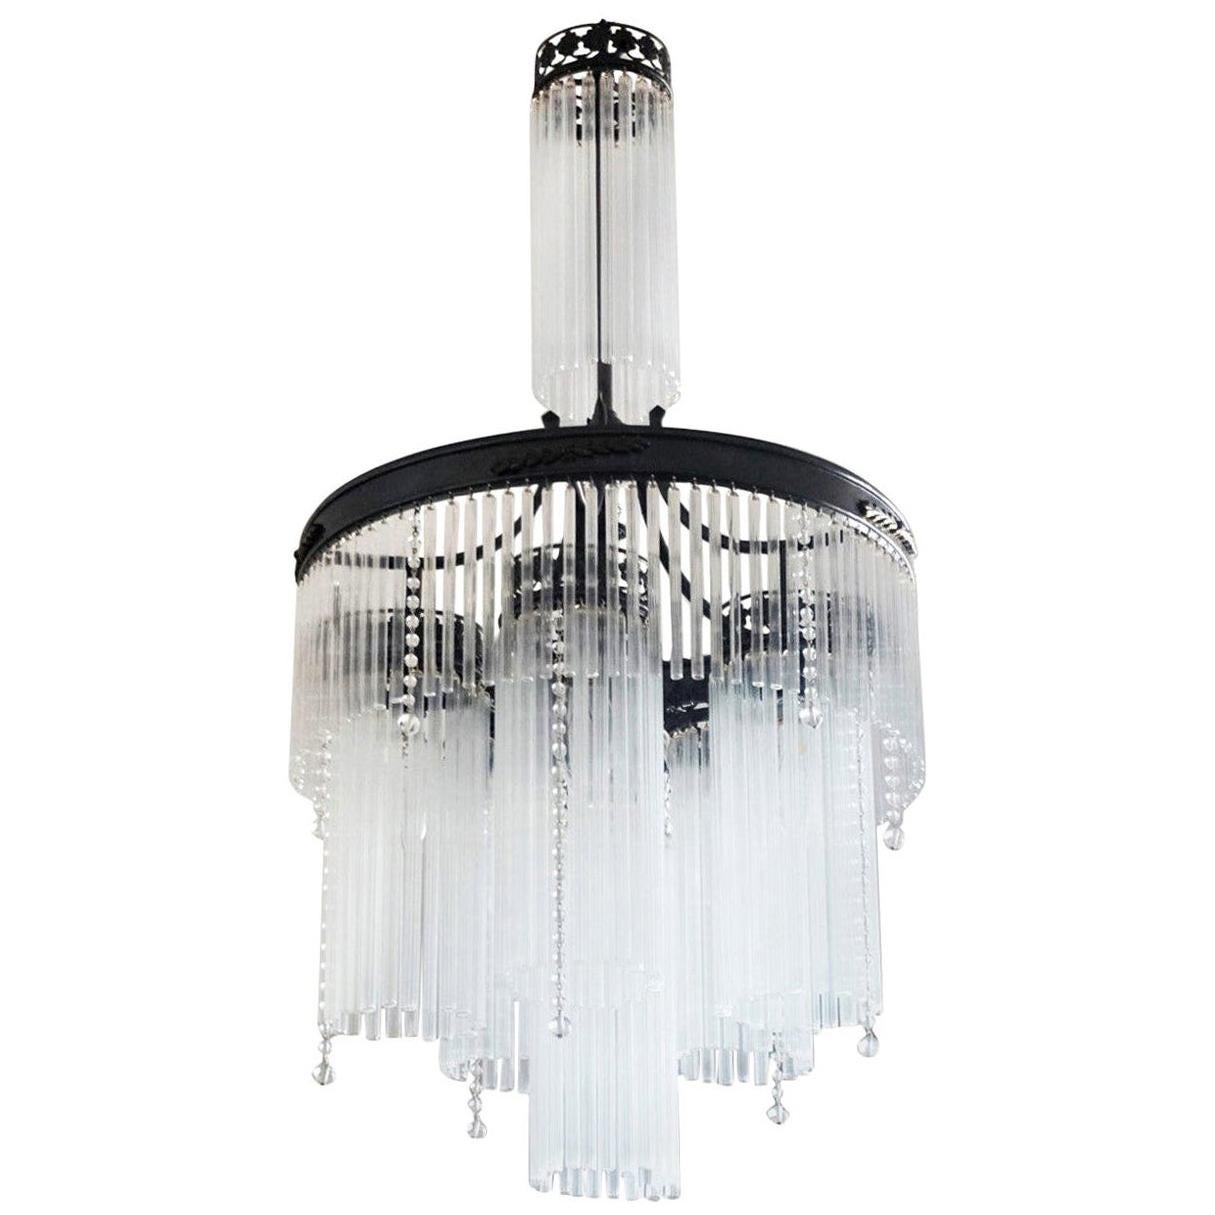 Vintage Cascading Spiked Glass Lighting